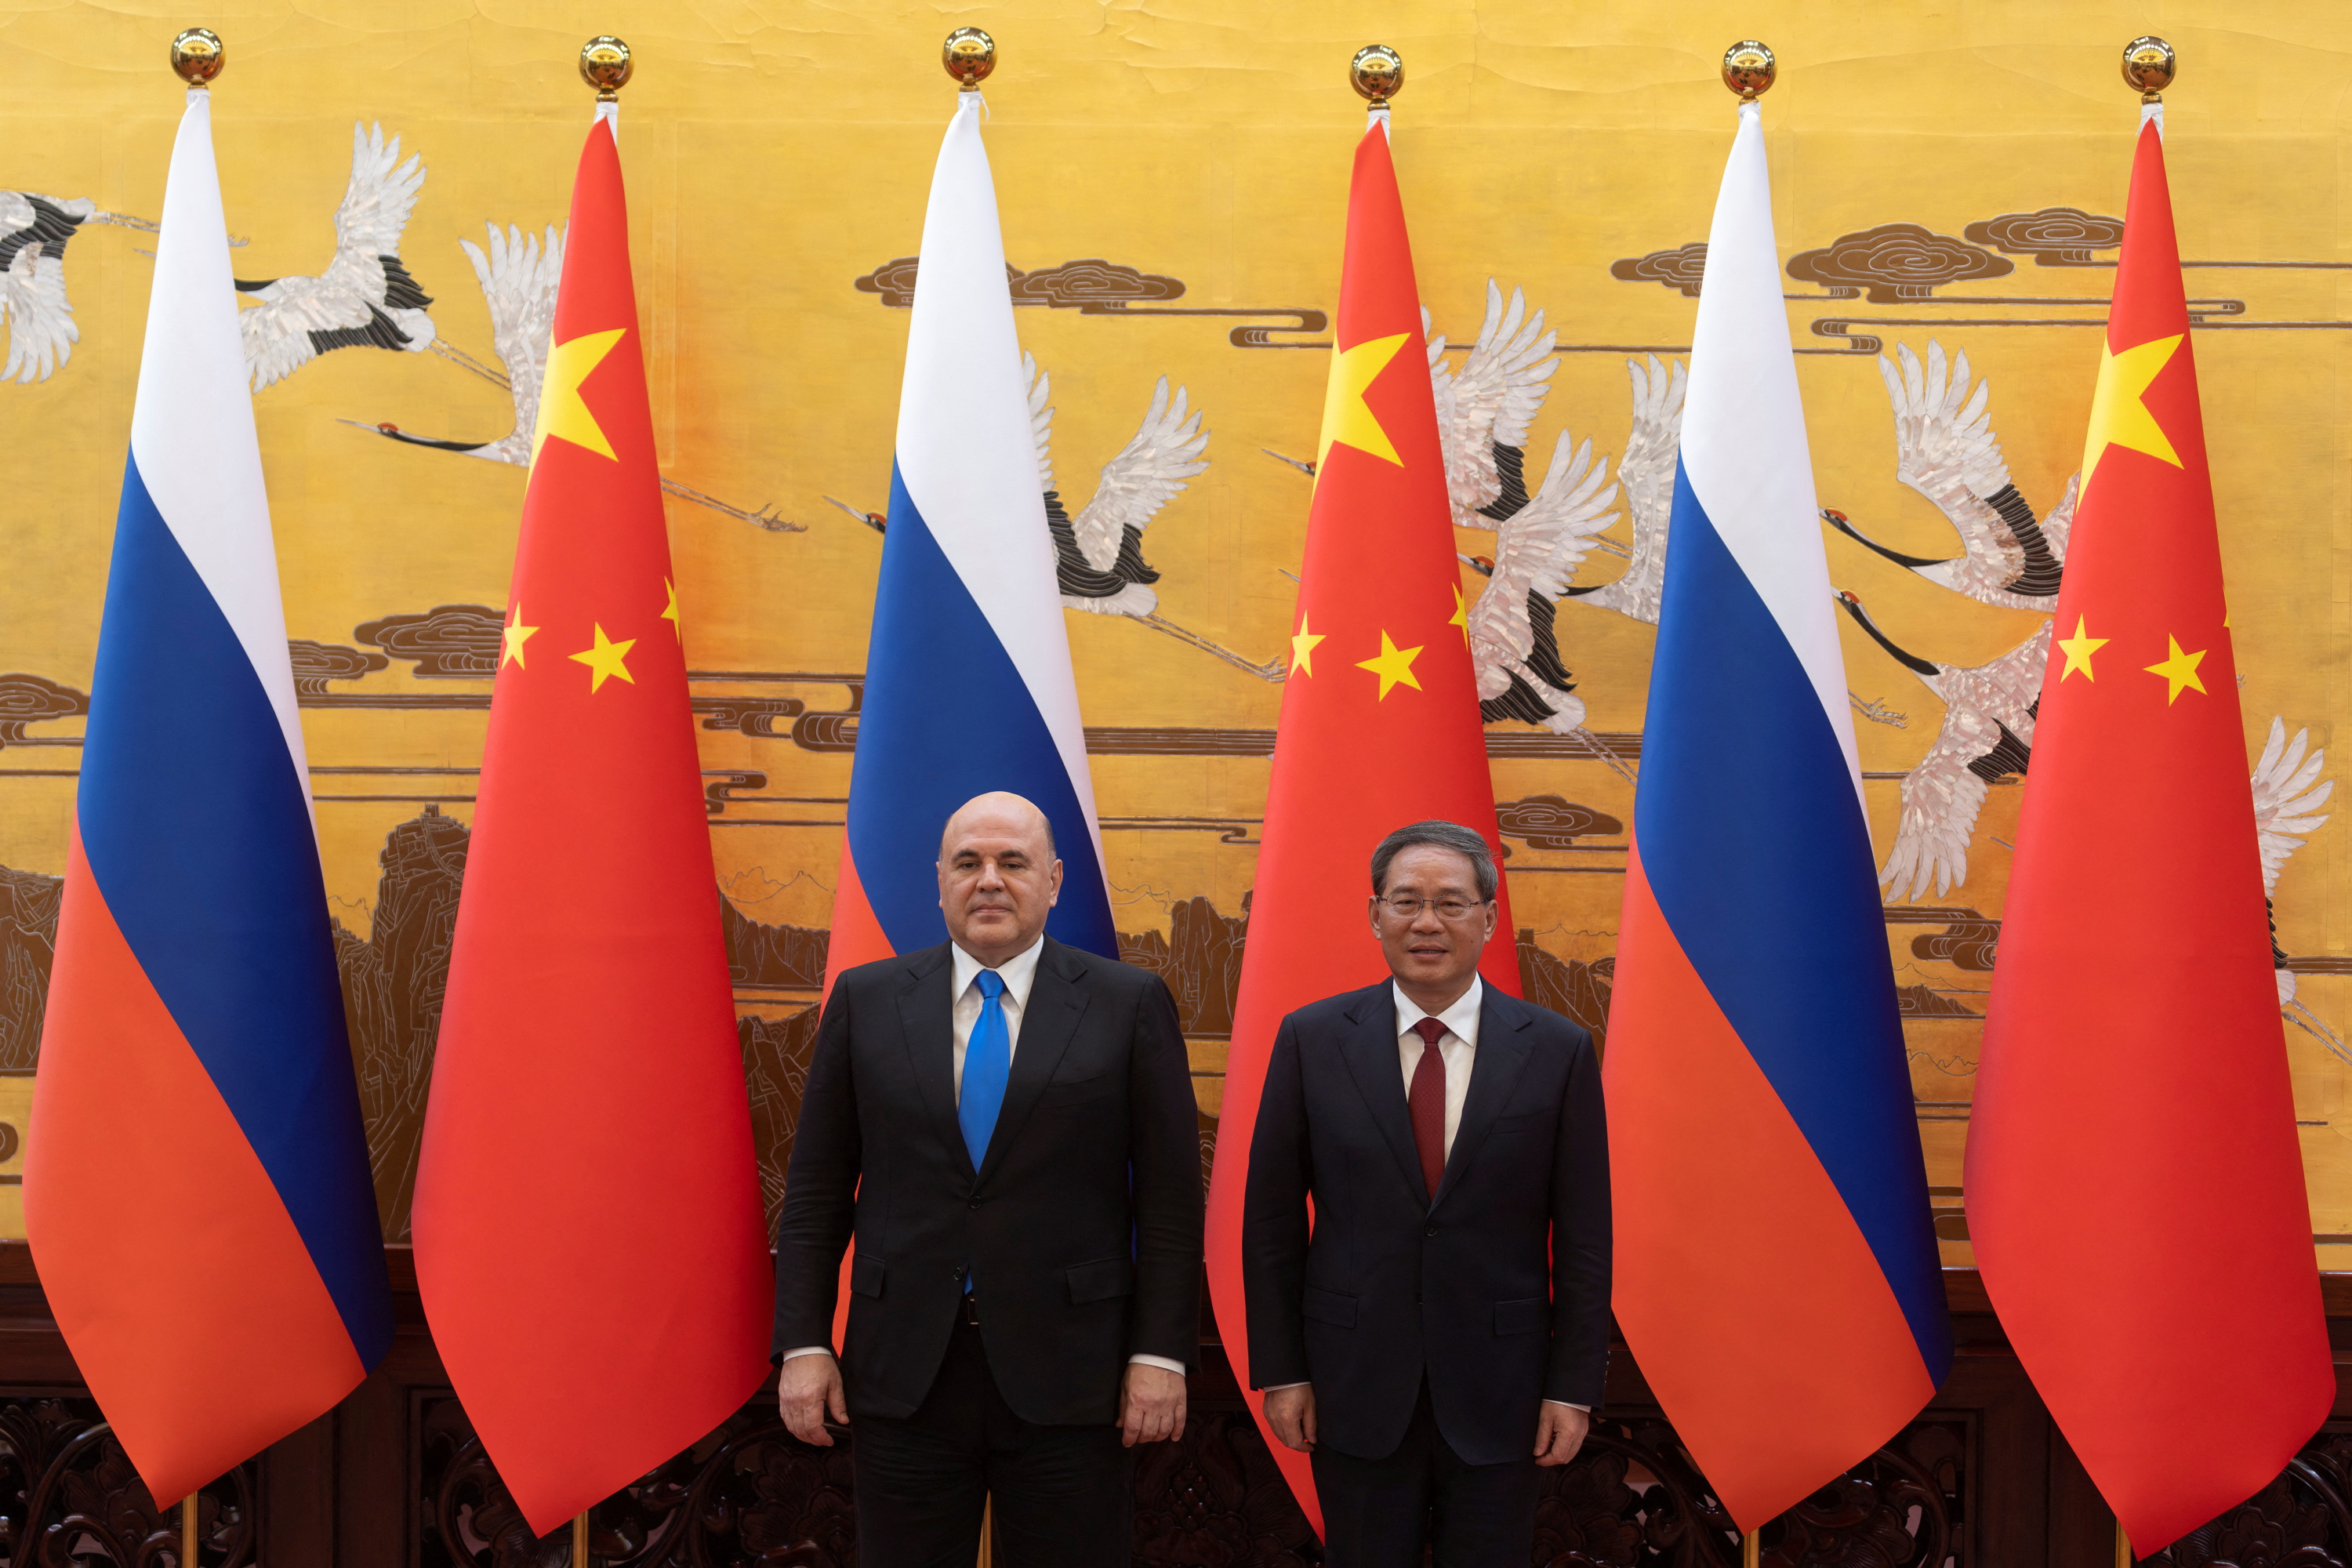 Russia, China seal economic pacts amid Western criticism | Reuters